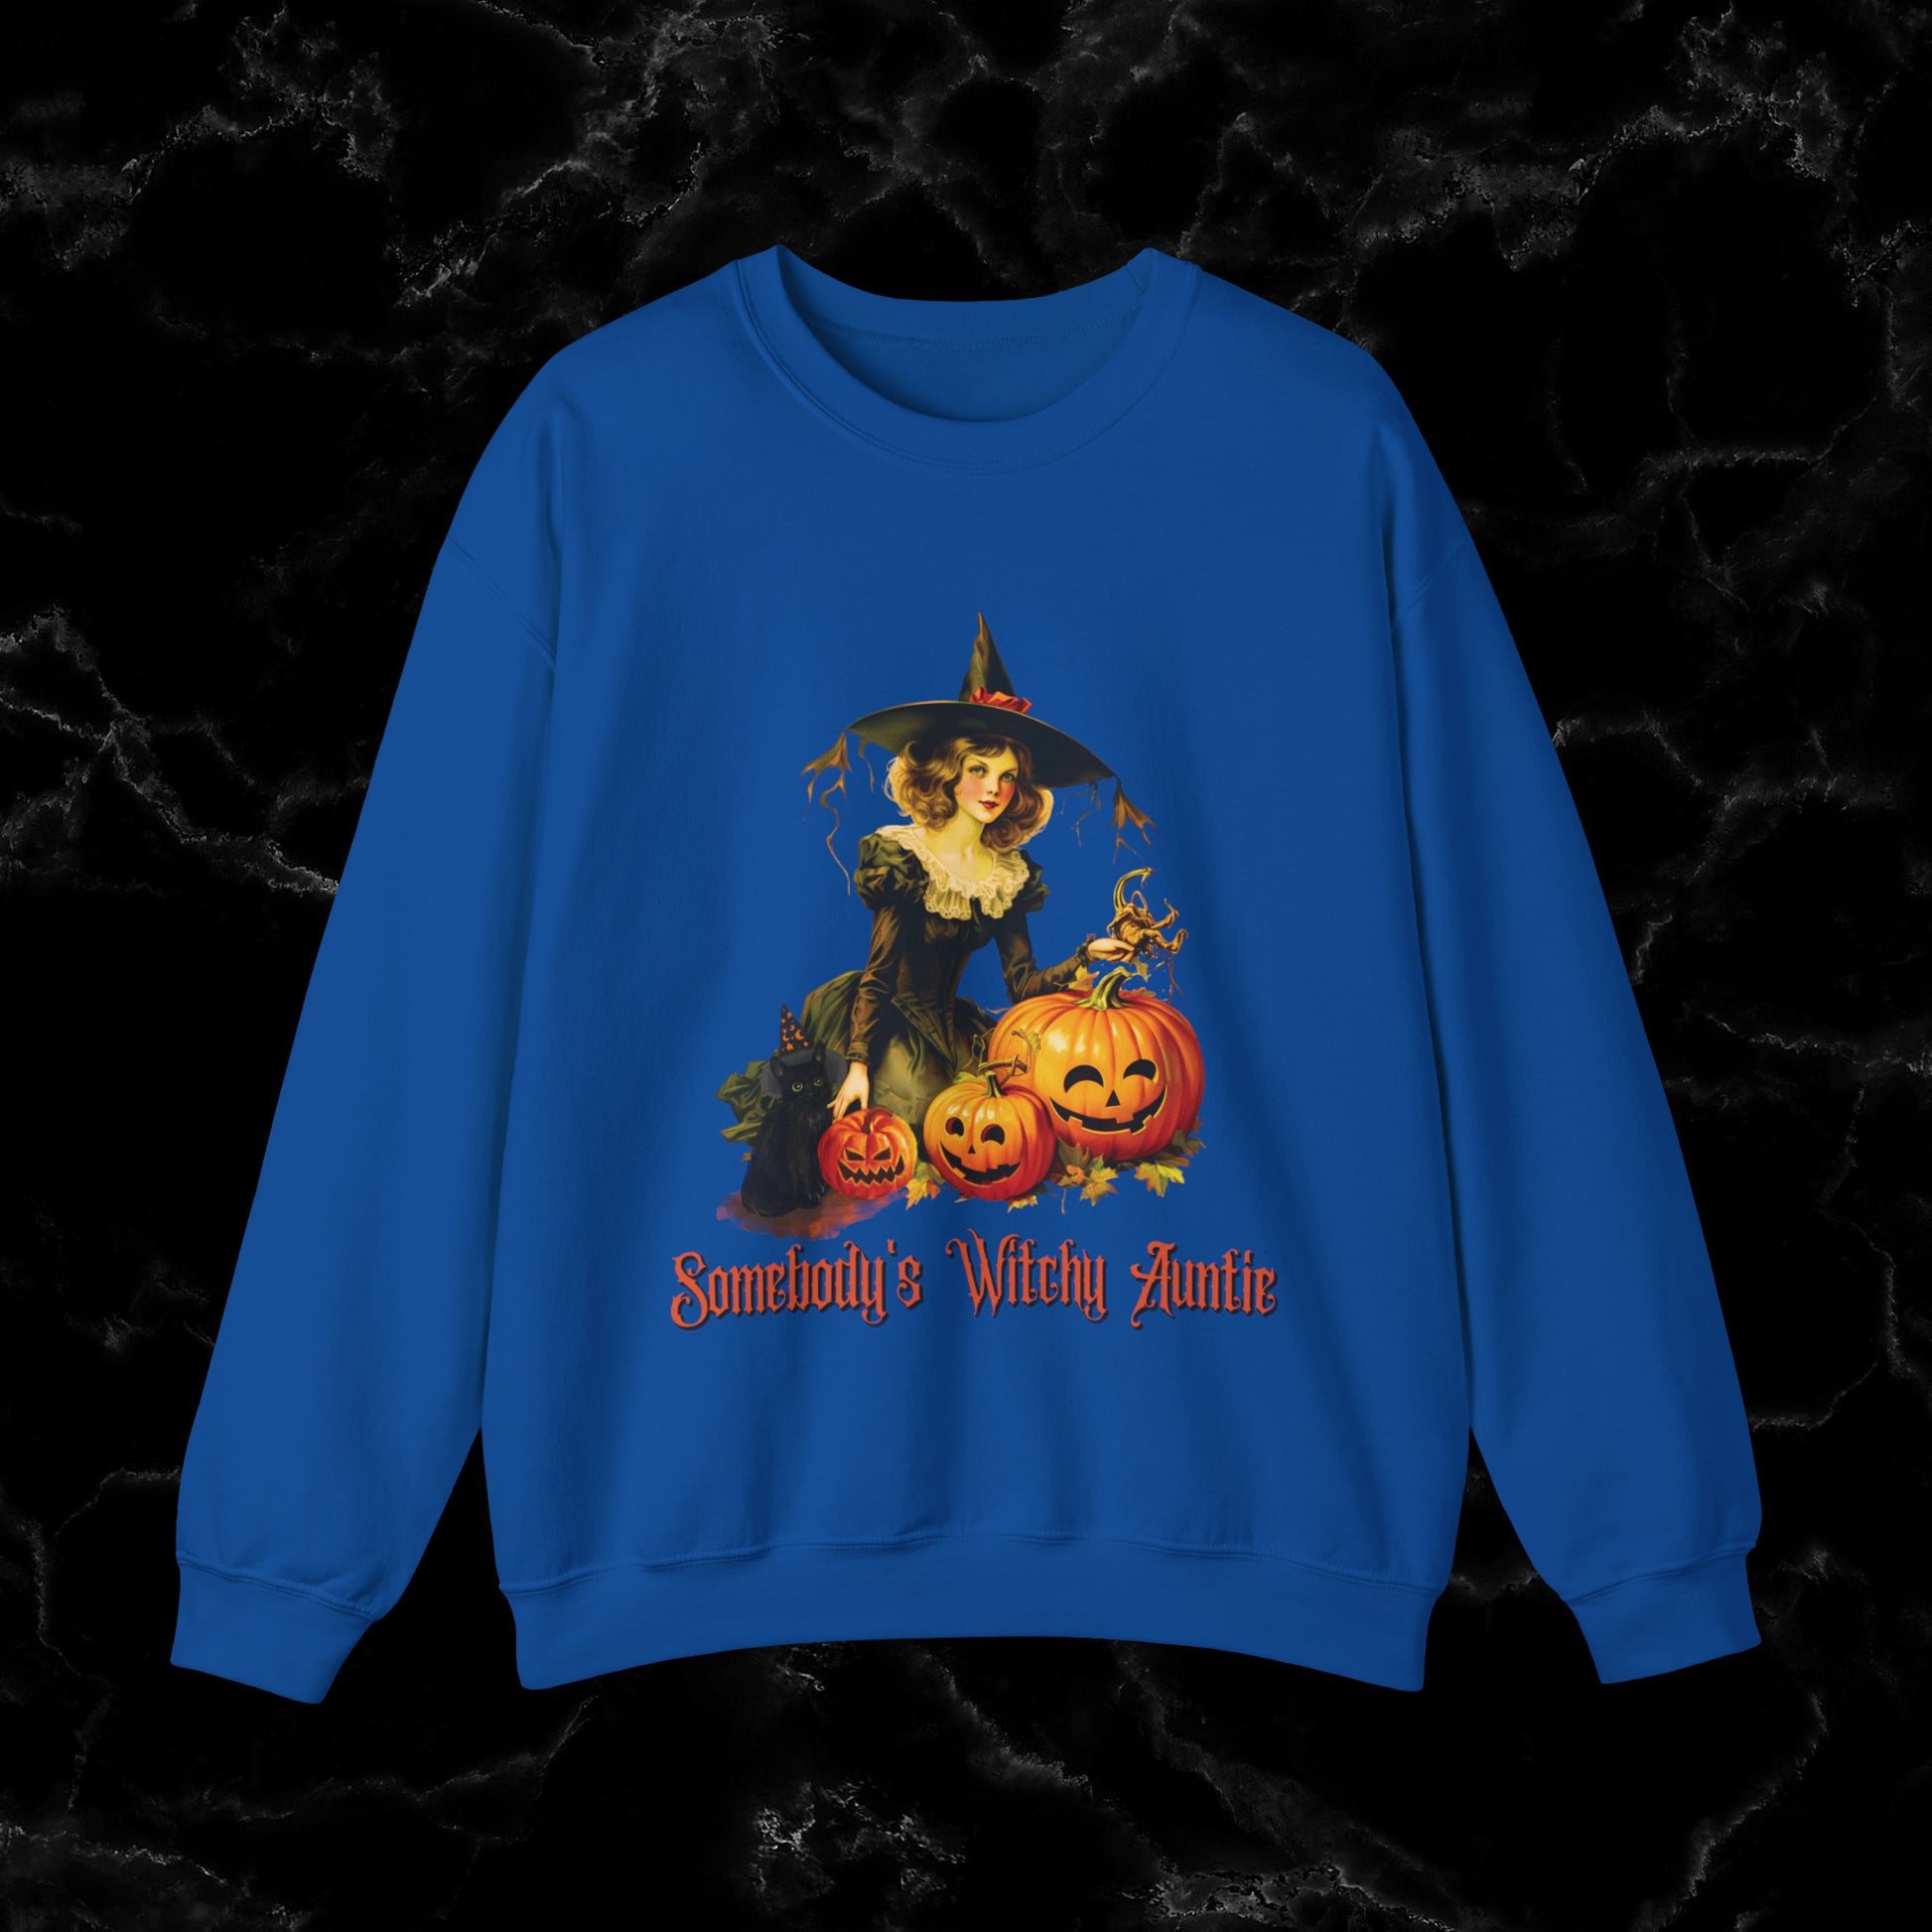 Witchy Auntie Sweatshirt - Cool Aunt Shirt for Halloweenl Vibes Sweatshirt S Royal 